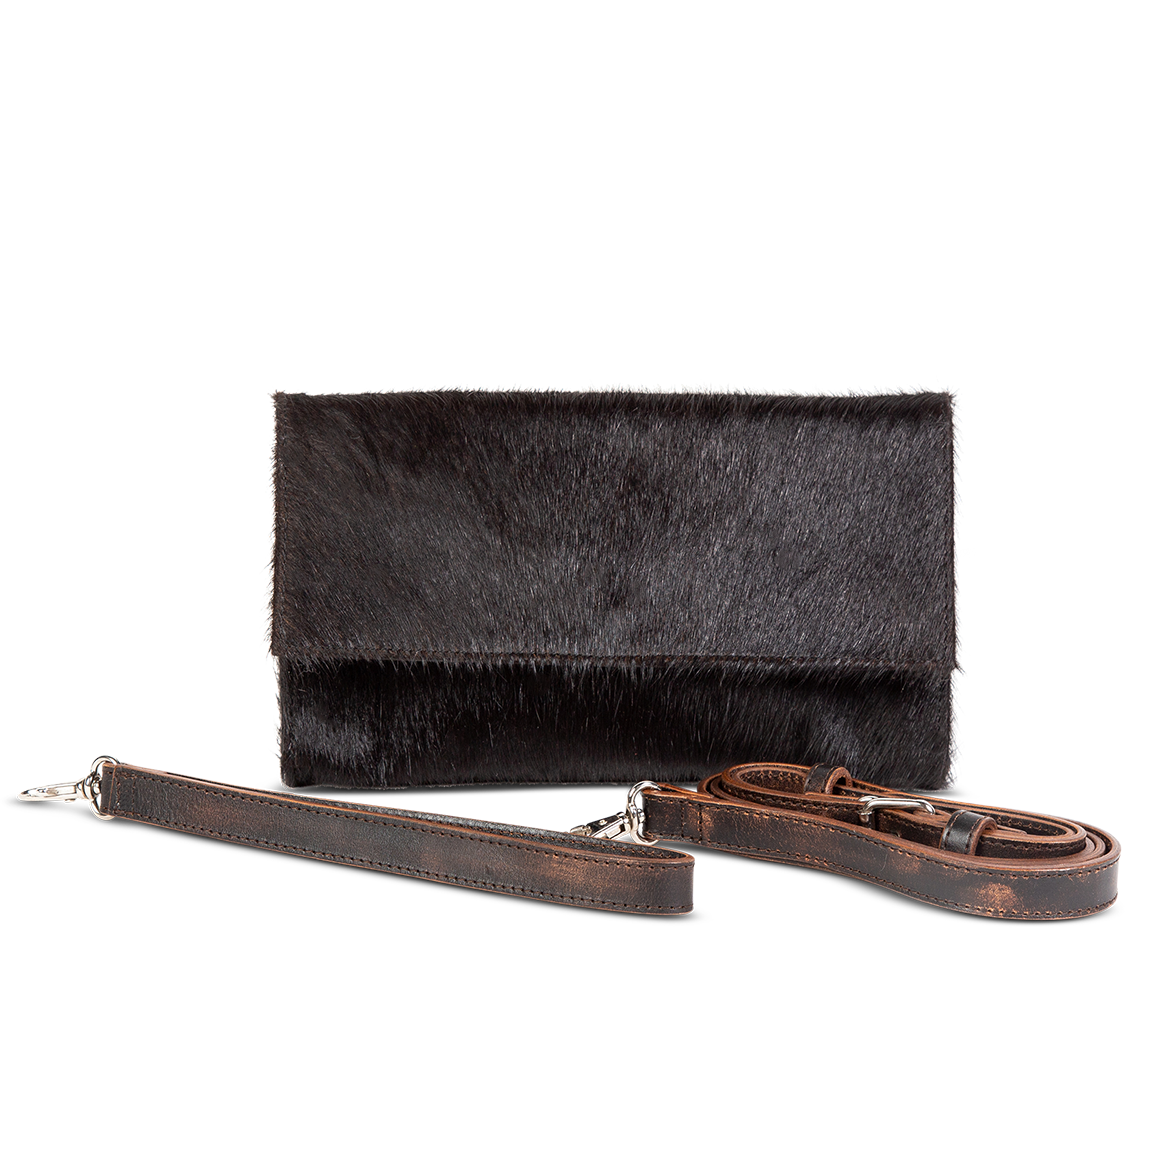 FREEBIRD lola black clutch with interchangeable wrist strap and adjustable cross-body strap and multiple interior pockets 